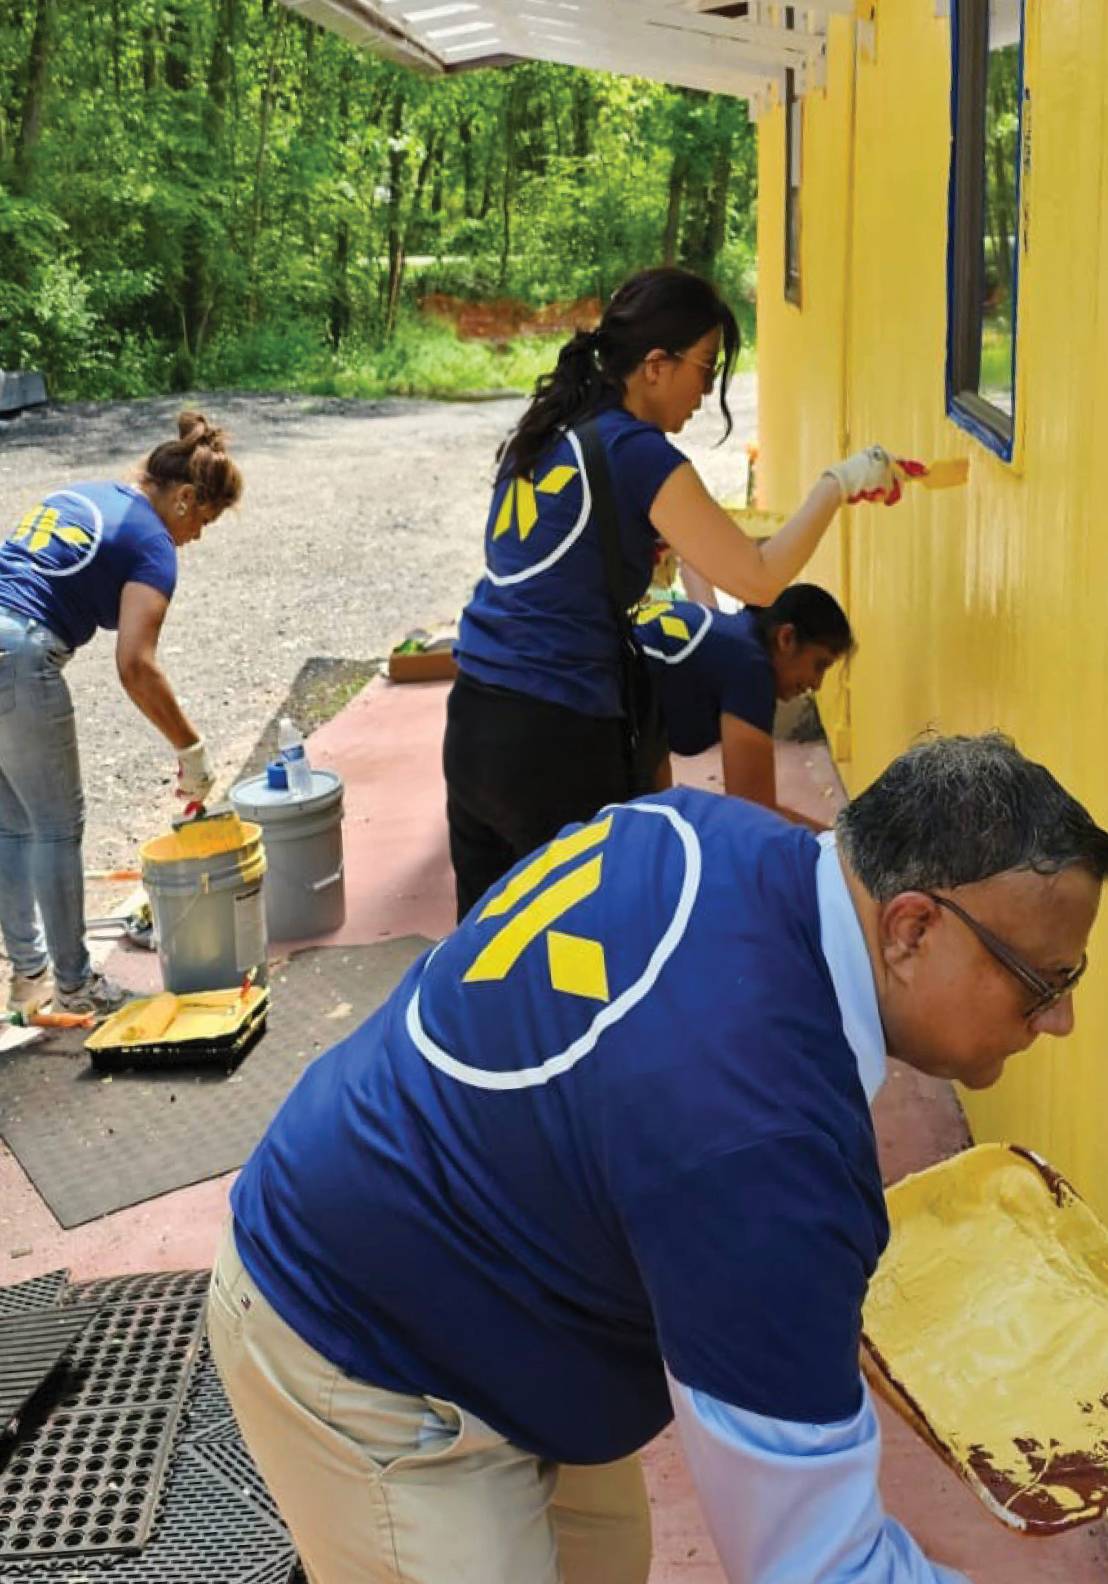 Webster colleagues paint a house yellow